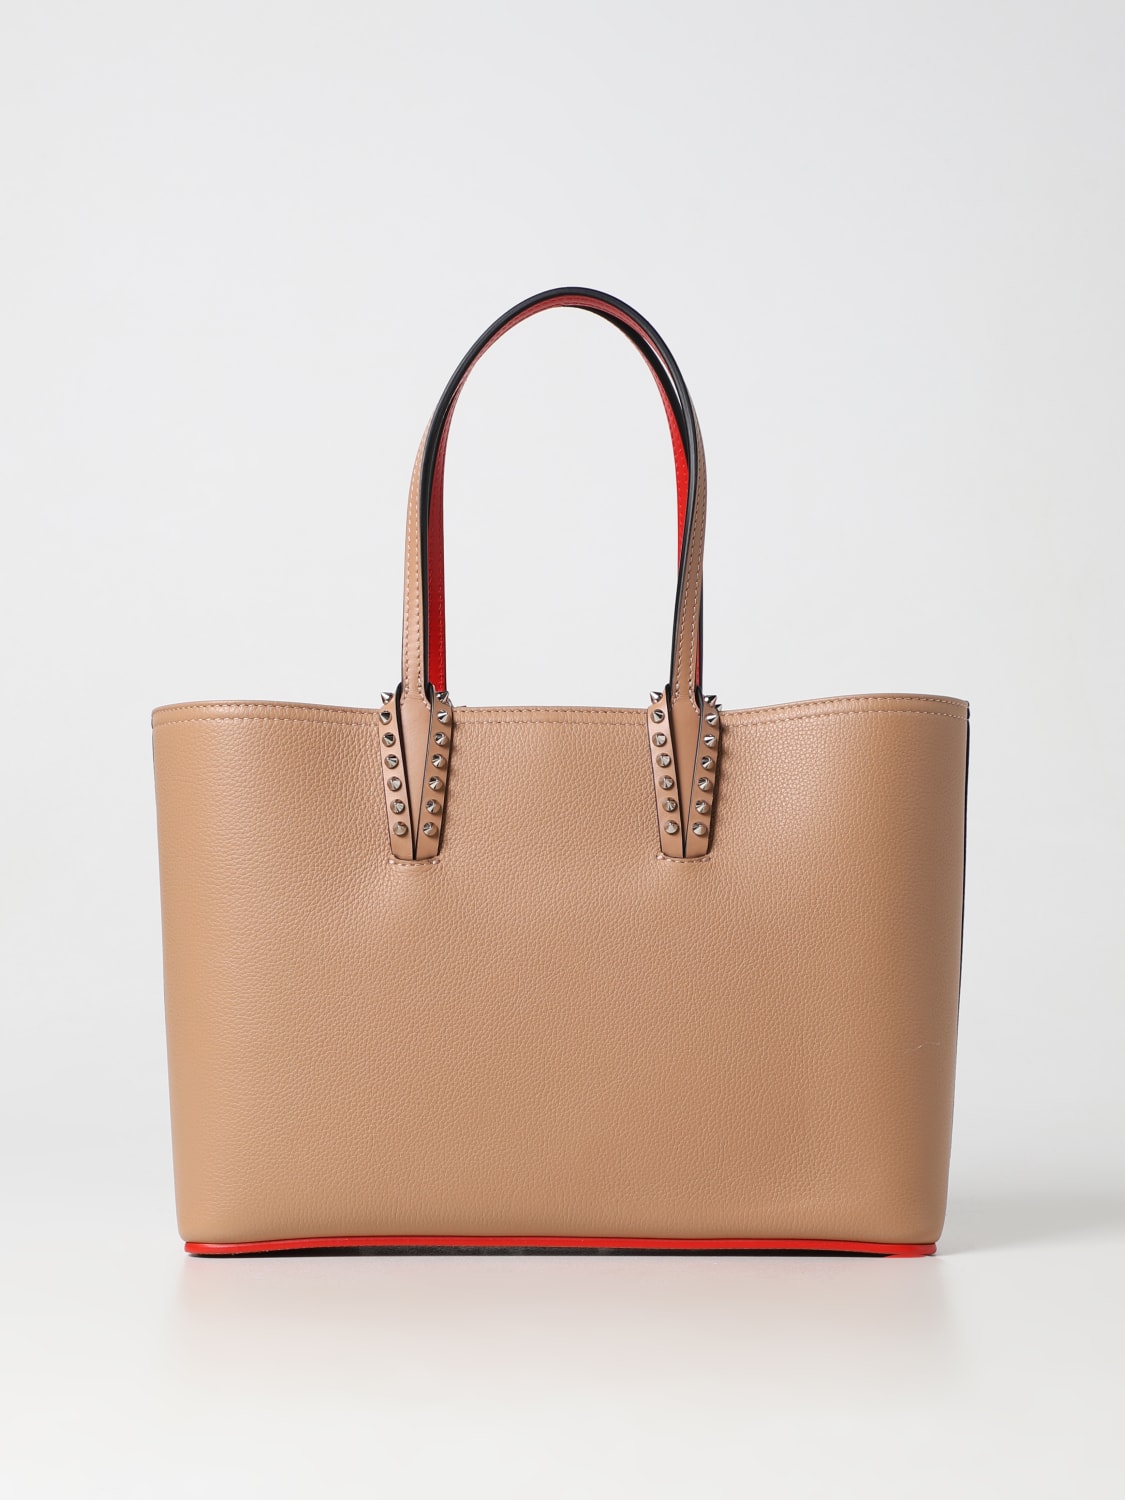 CHRISTIAN LOUBOUTIN: Cabata bag in grained leather - Nude  Christian  Louboutin tote bags 3205219 online at